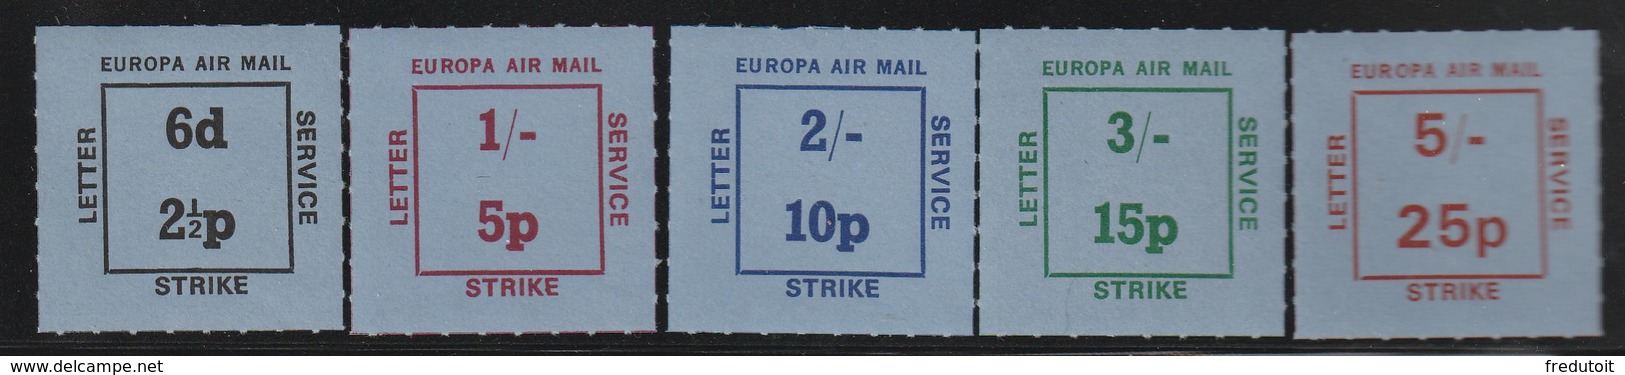 LETTER SERVICE STRIKE - 5 Timbres** Europa Air Mail - Local Issues